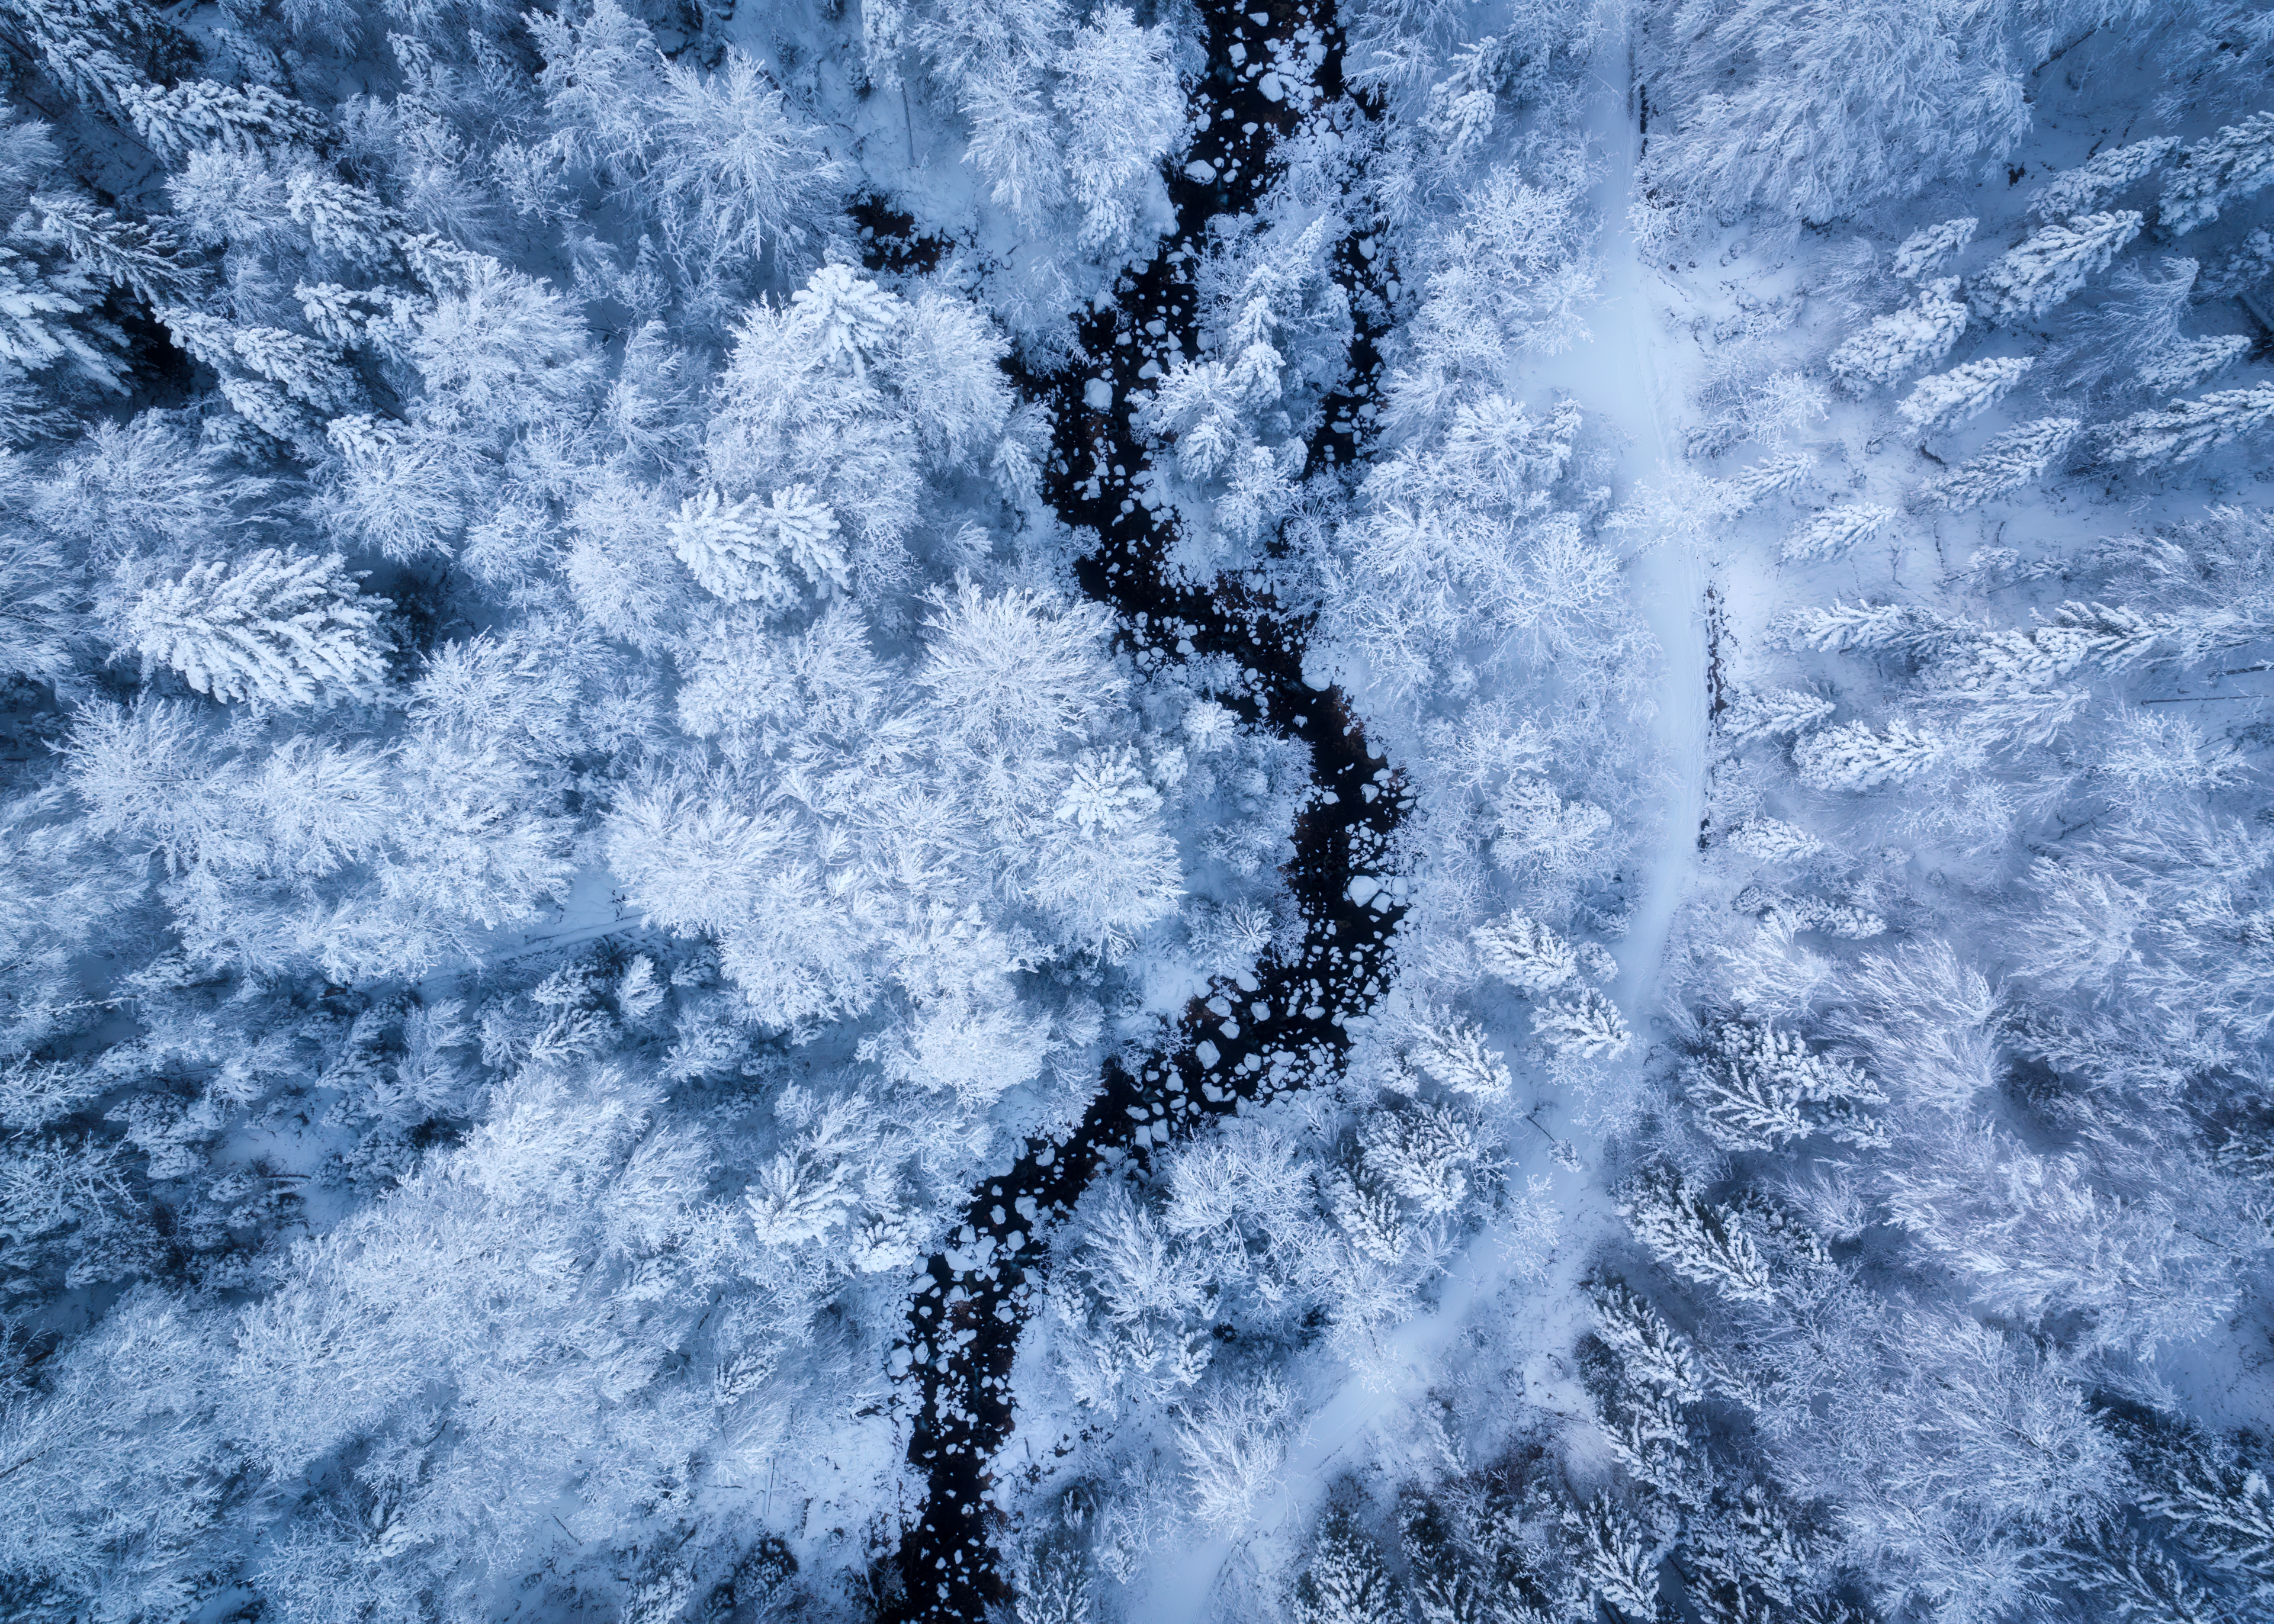 HD wallpaper, Cold, Snow Covered, Winter Forest, Aerial View, White Aesthetic, Water Stream